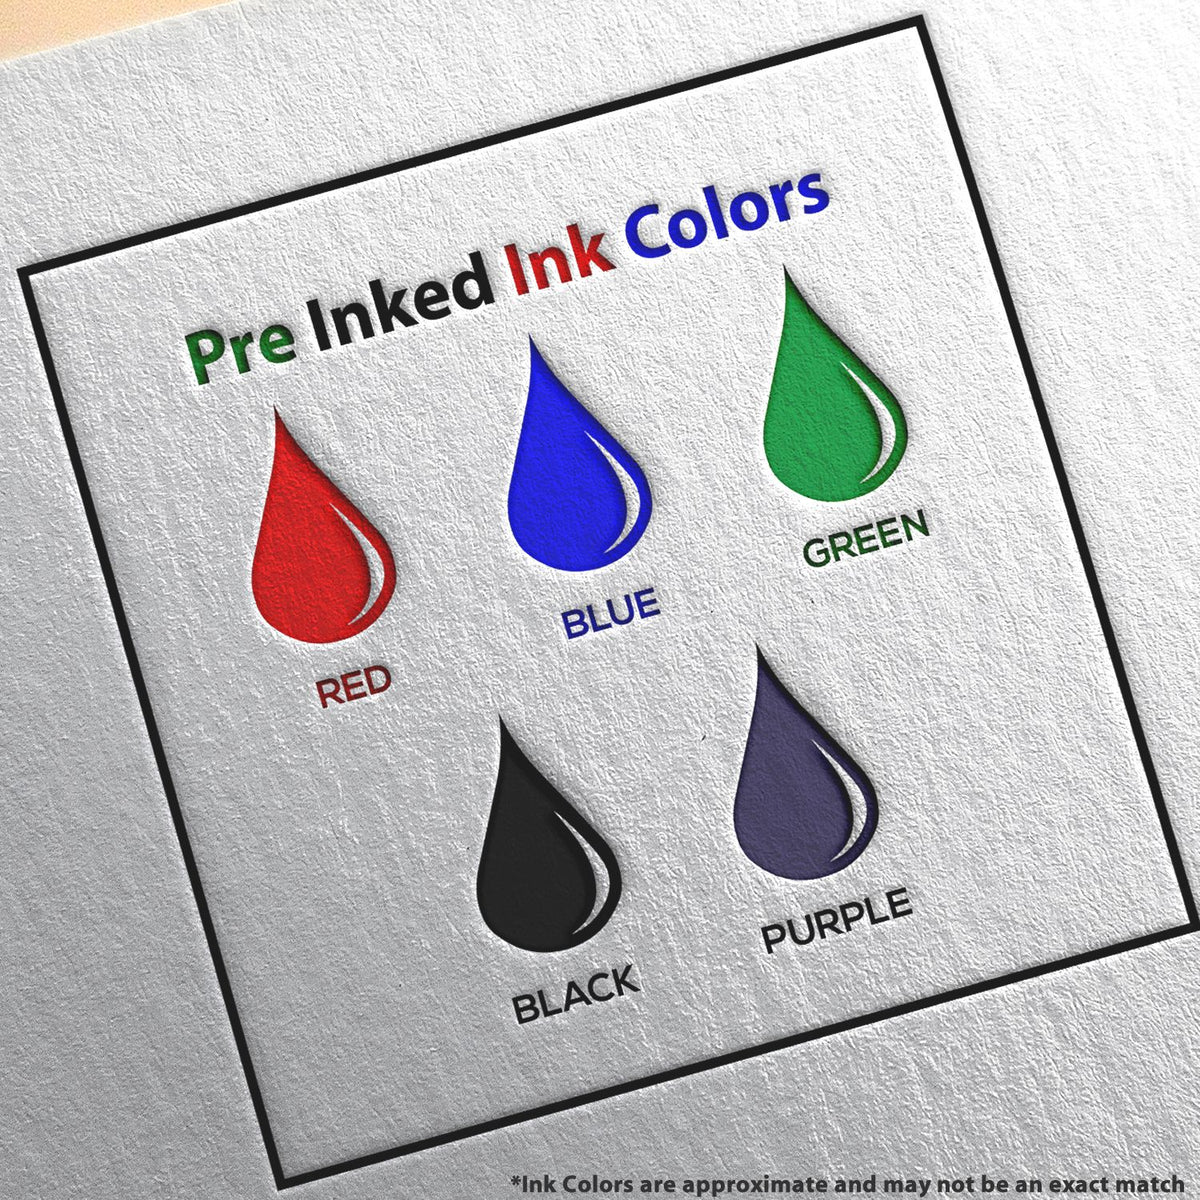 A picture showing the different ink colors or hues available for the Slim Pre-Inked Iowa Land Surveyor Seal Stamp product.